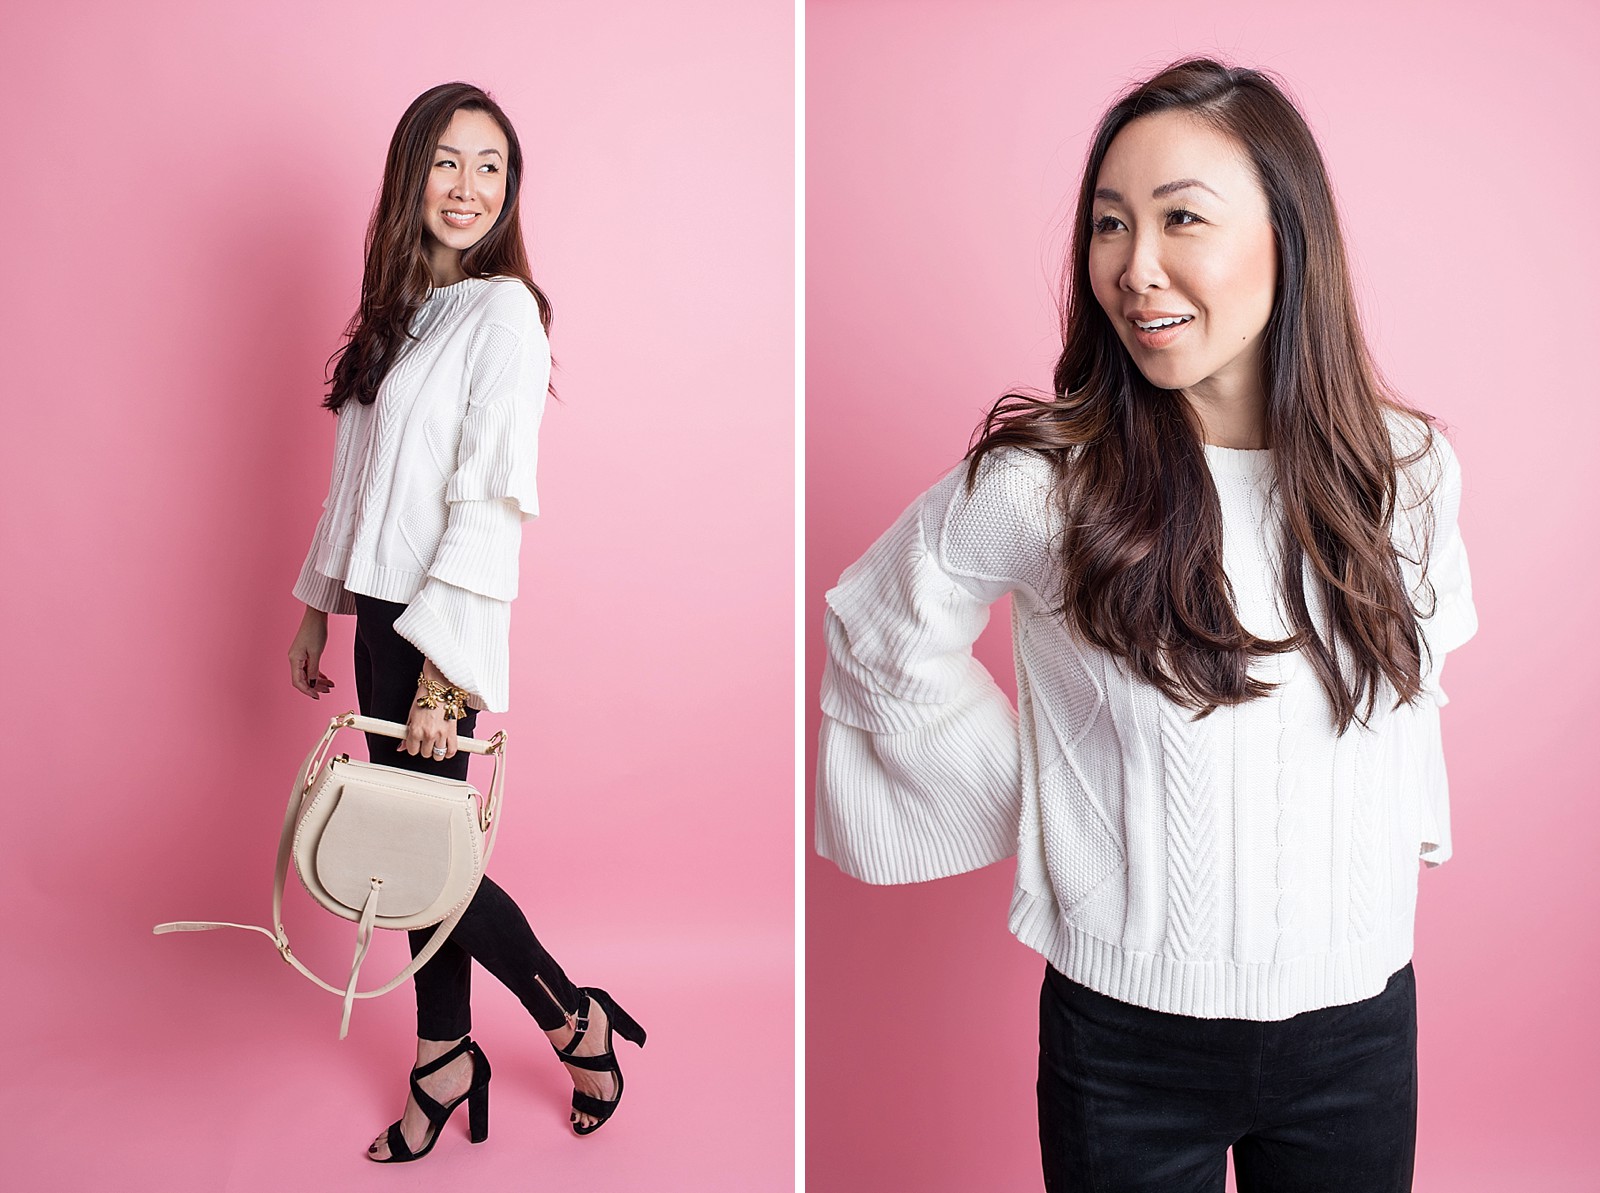 fashion blogger phoenix diana Elizabeth neutral outfit ruffled top sleeves